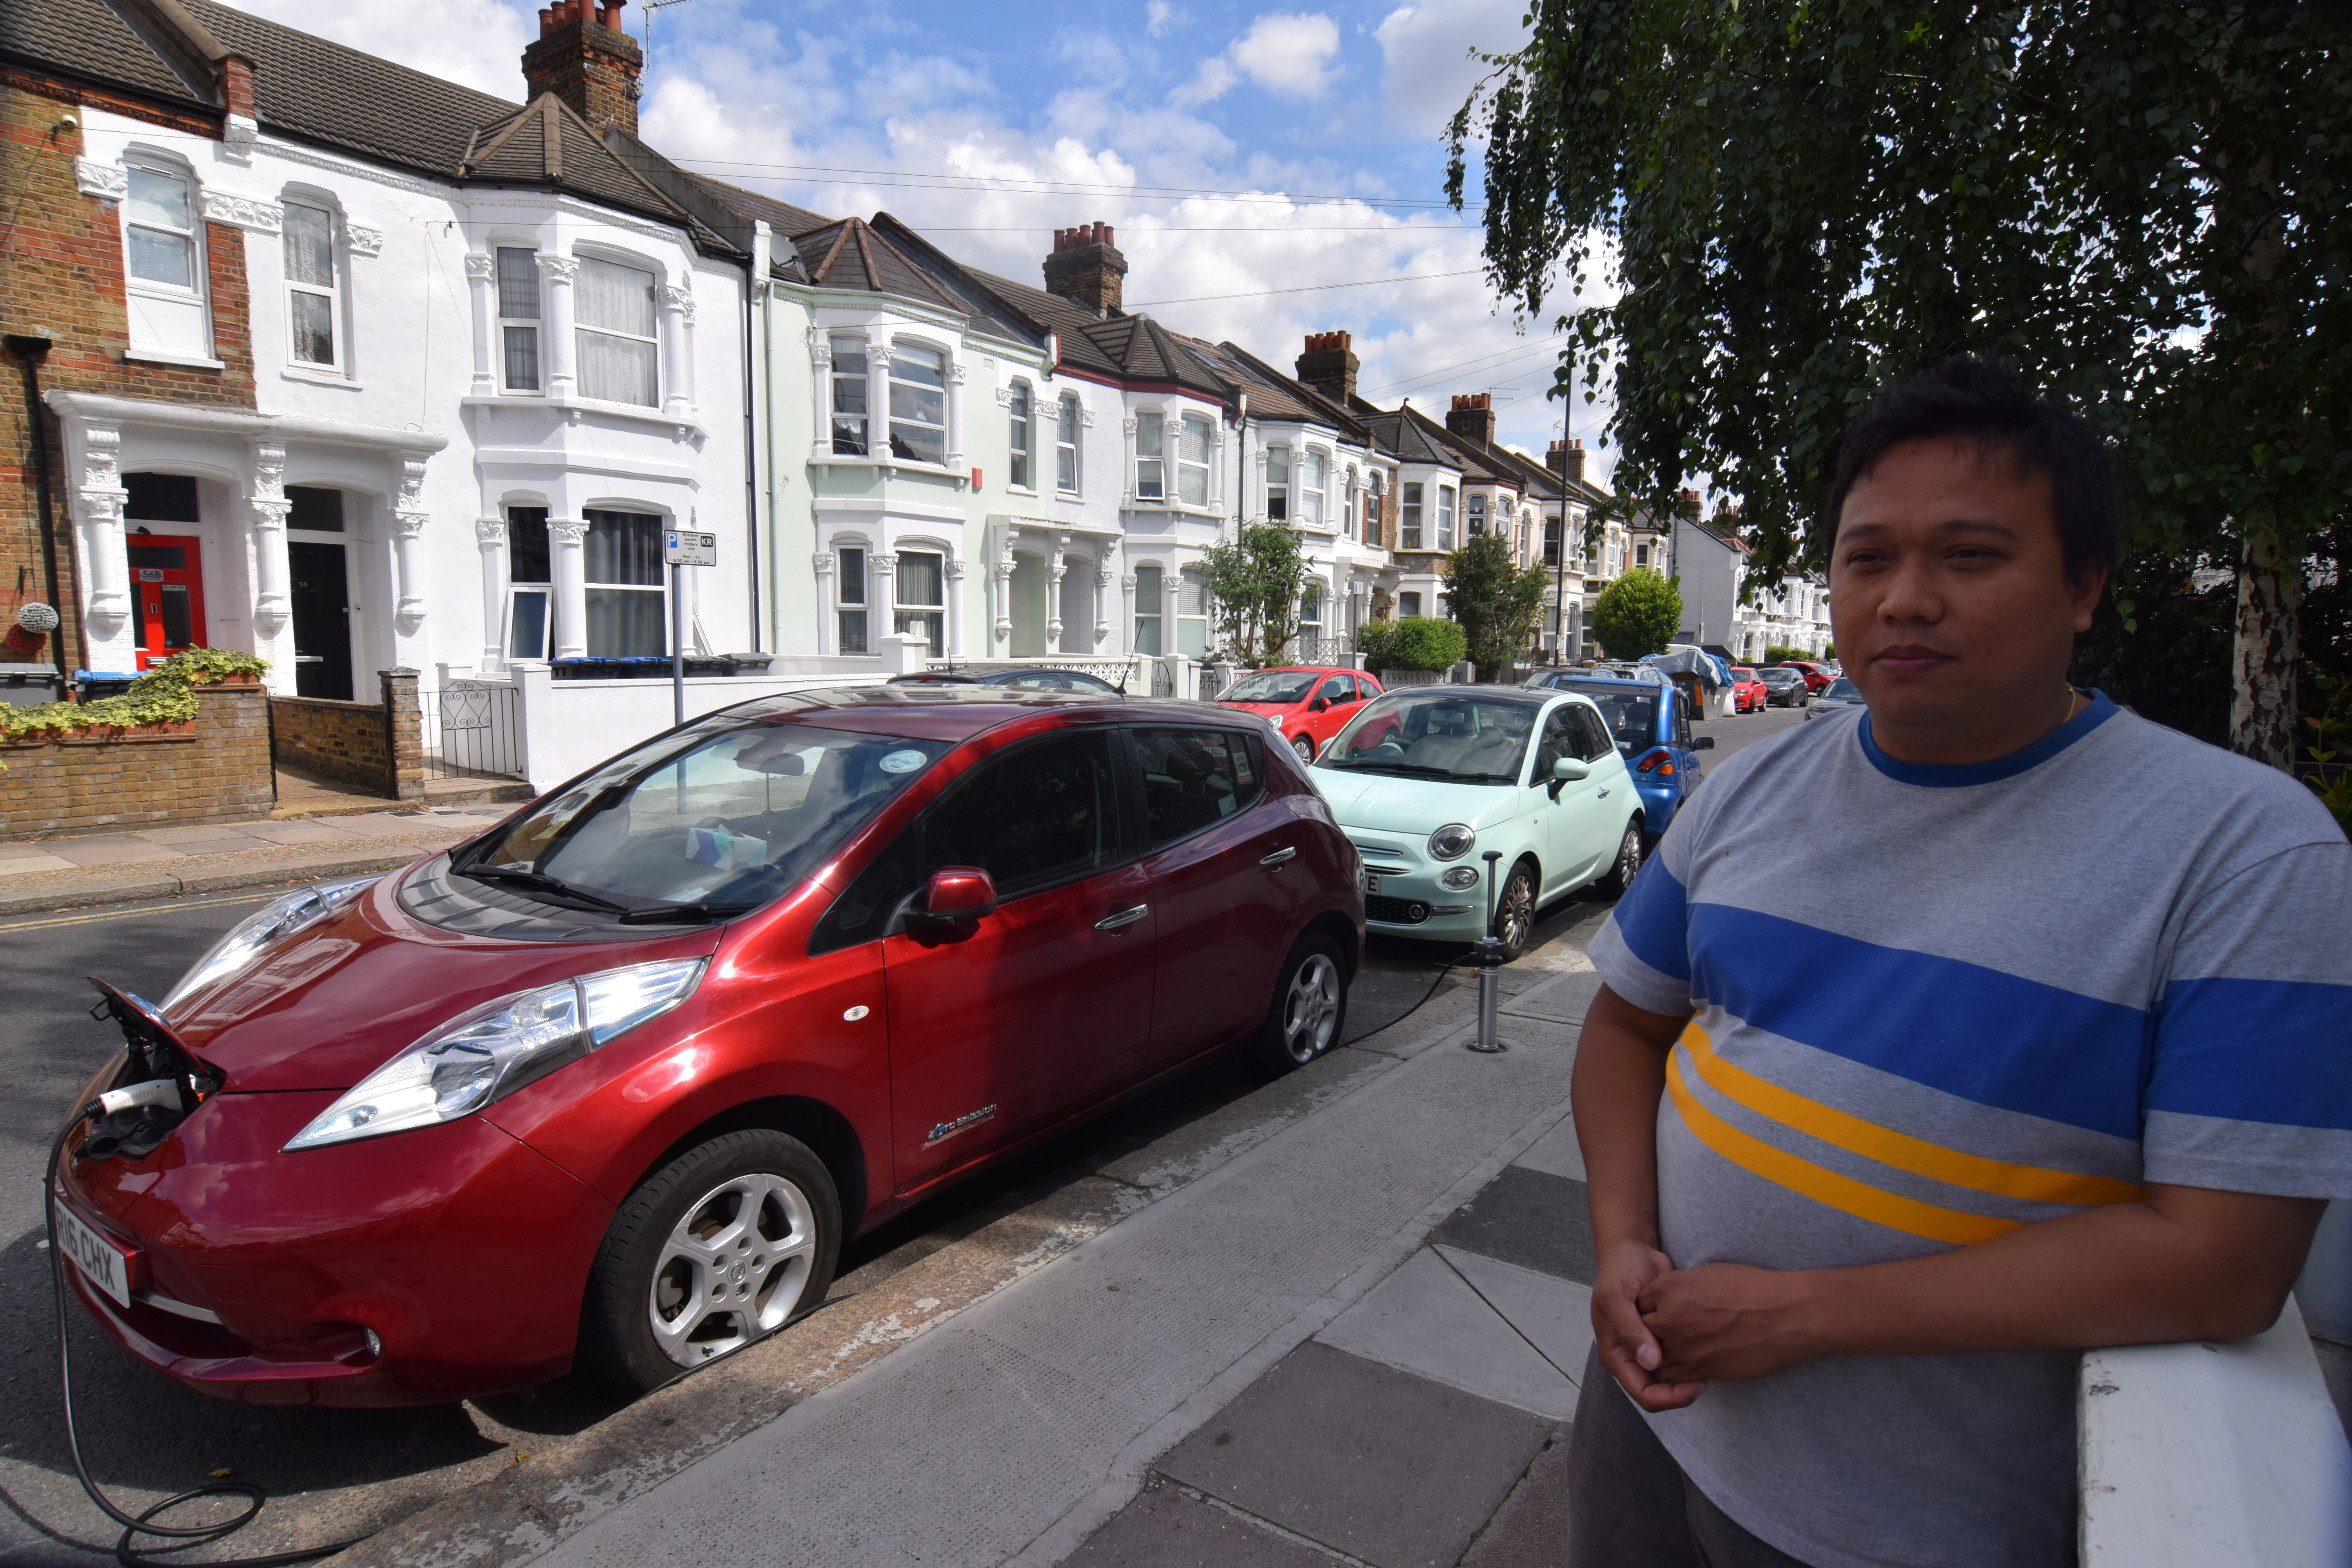 Uber driver Tim Win poses for a photo with his fully-electric Nissan Leaf, plugged into an on-street residential electric vehicle charging system developed by startup Trojan Energy, in London